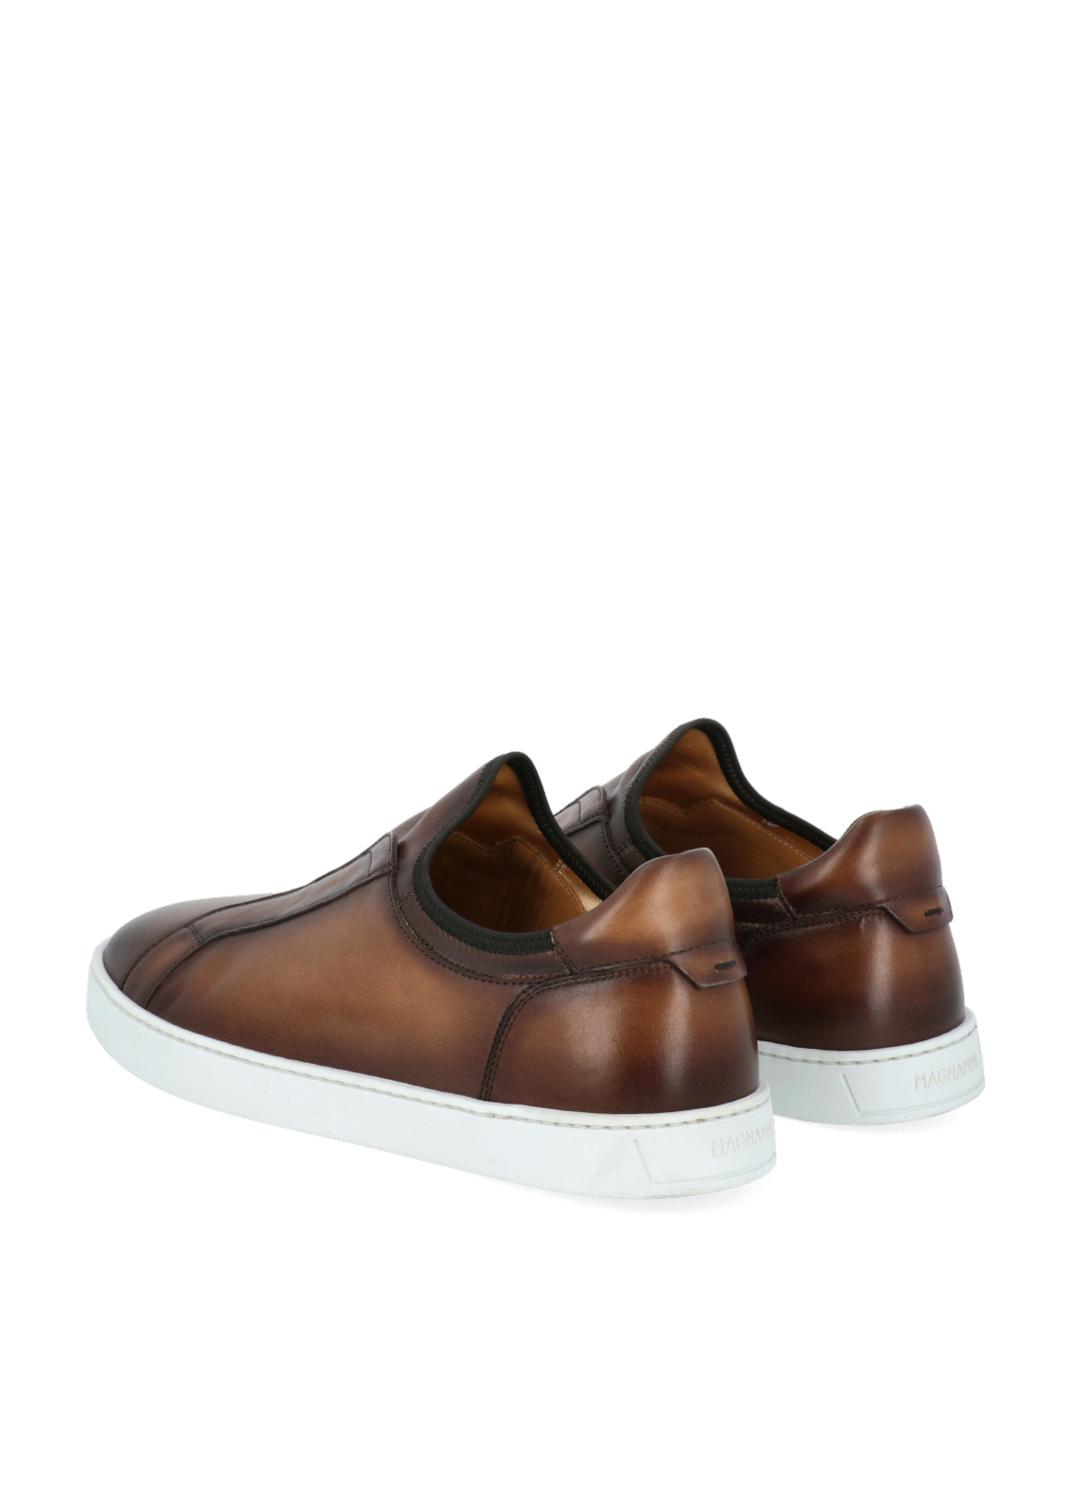 Magnanni Sneakers  MGN-25613